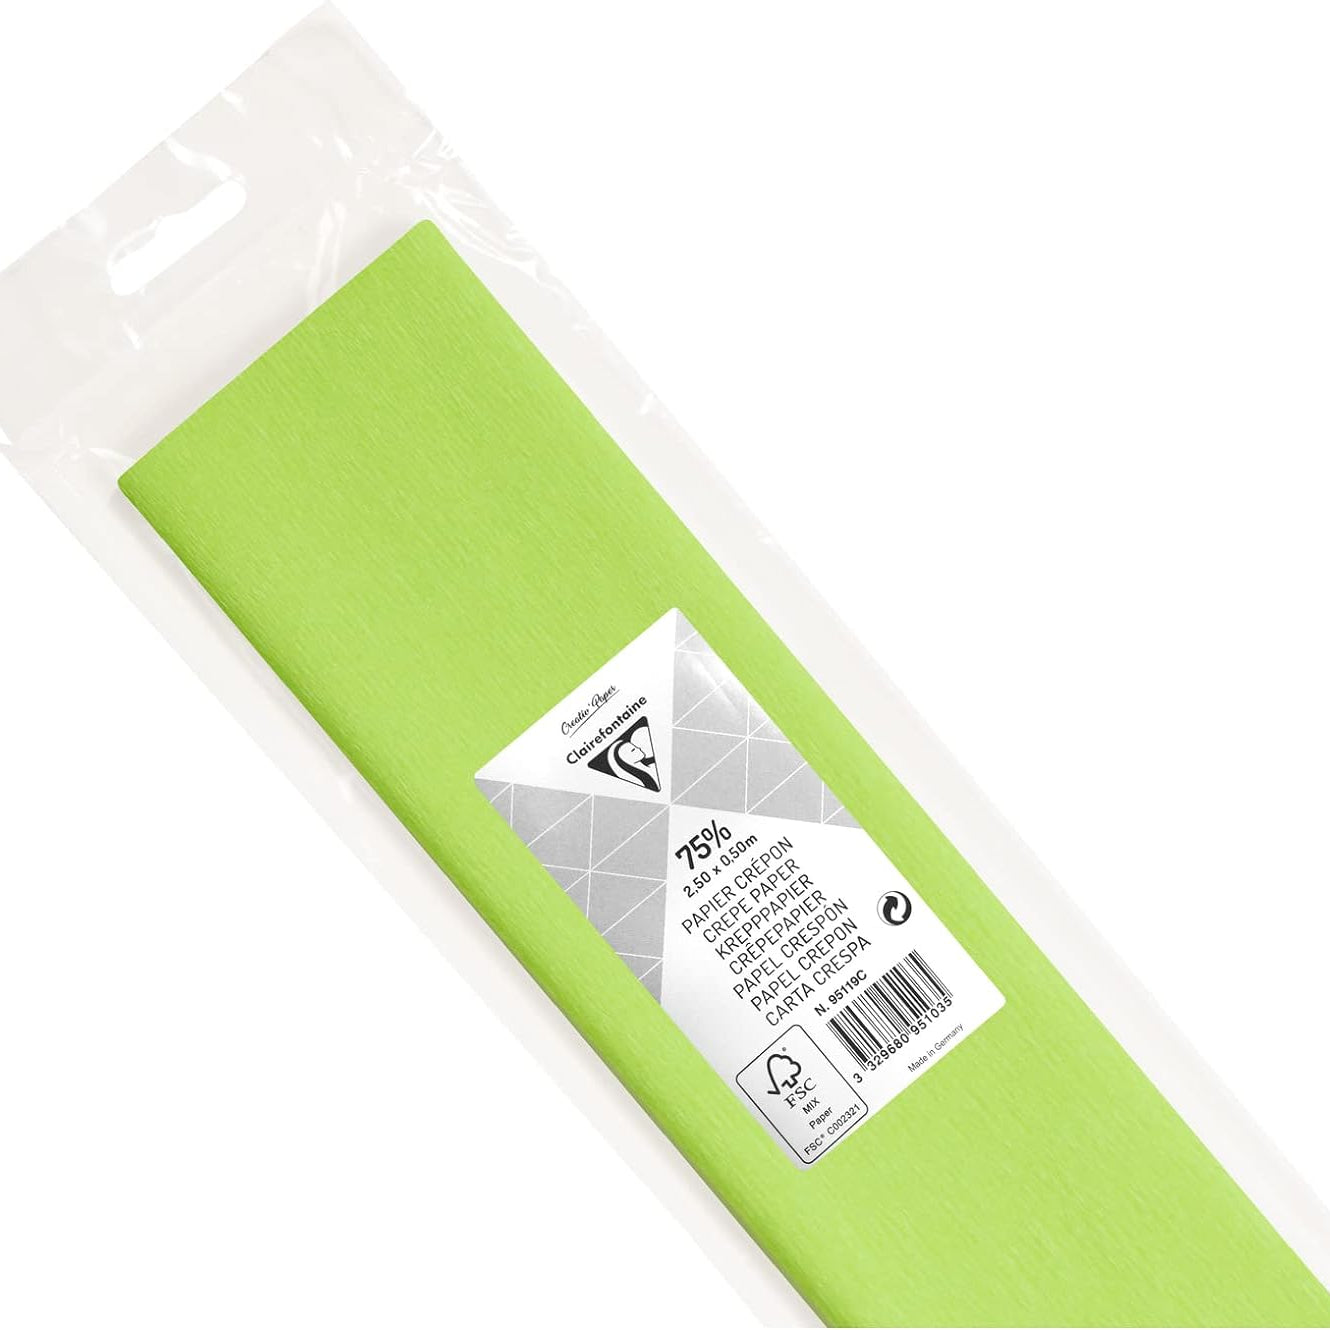 CLAIREFONTAINE Crepe Paper Roll 75% 2.5x0.5M Apple Green